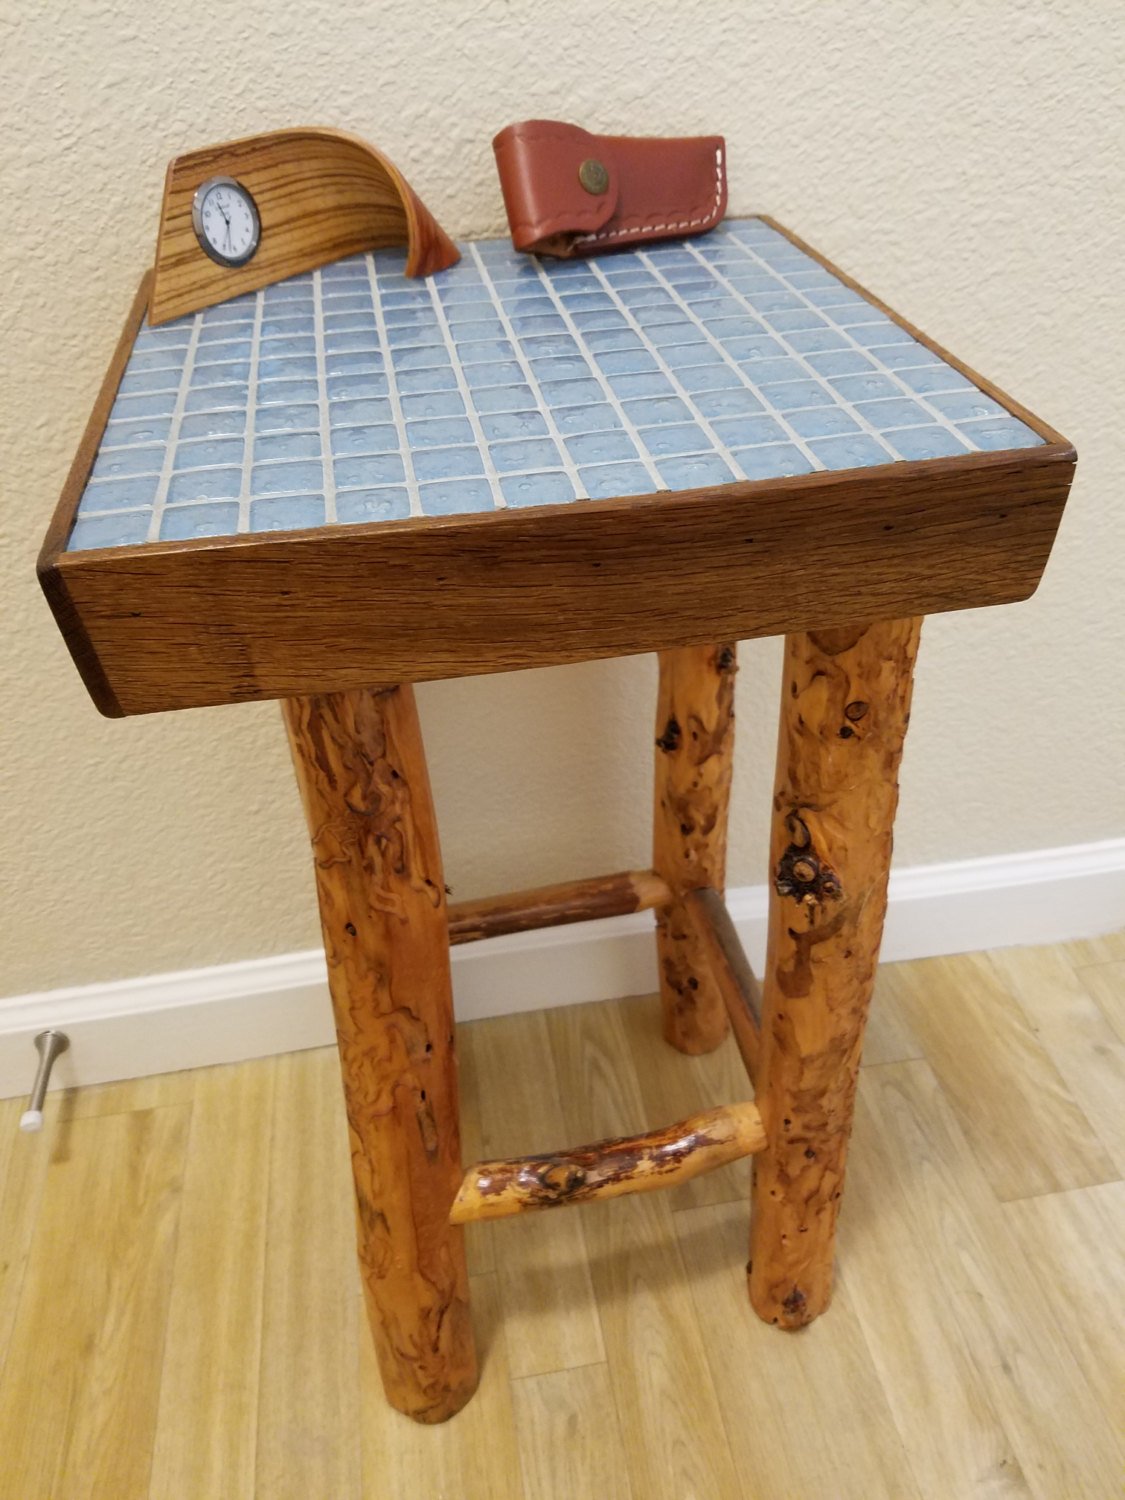 reclaimed wood driftwood glass tile end and accent table fullxfull perfect blend beach rustic style small chrome side door console cabinet retro patio chair covers target kids